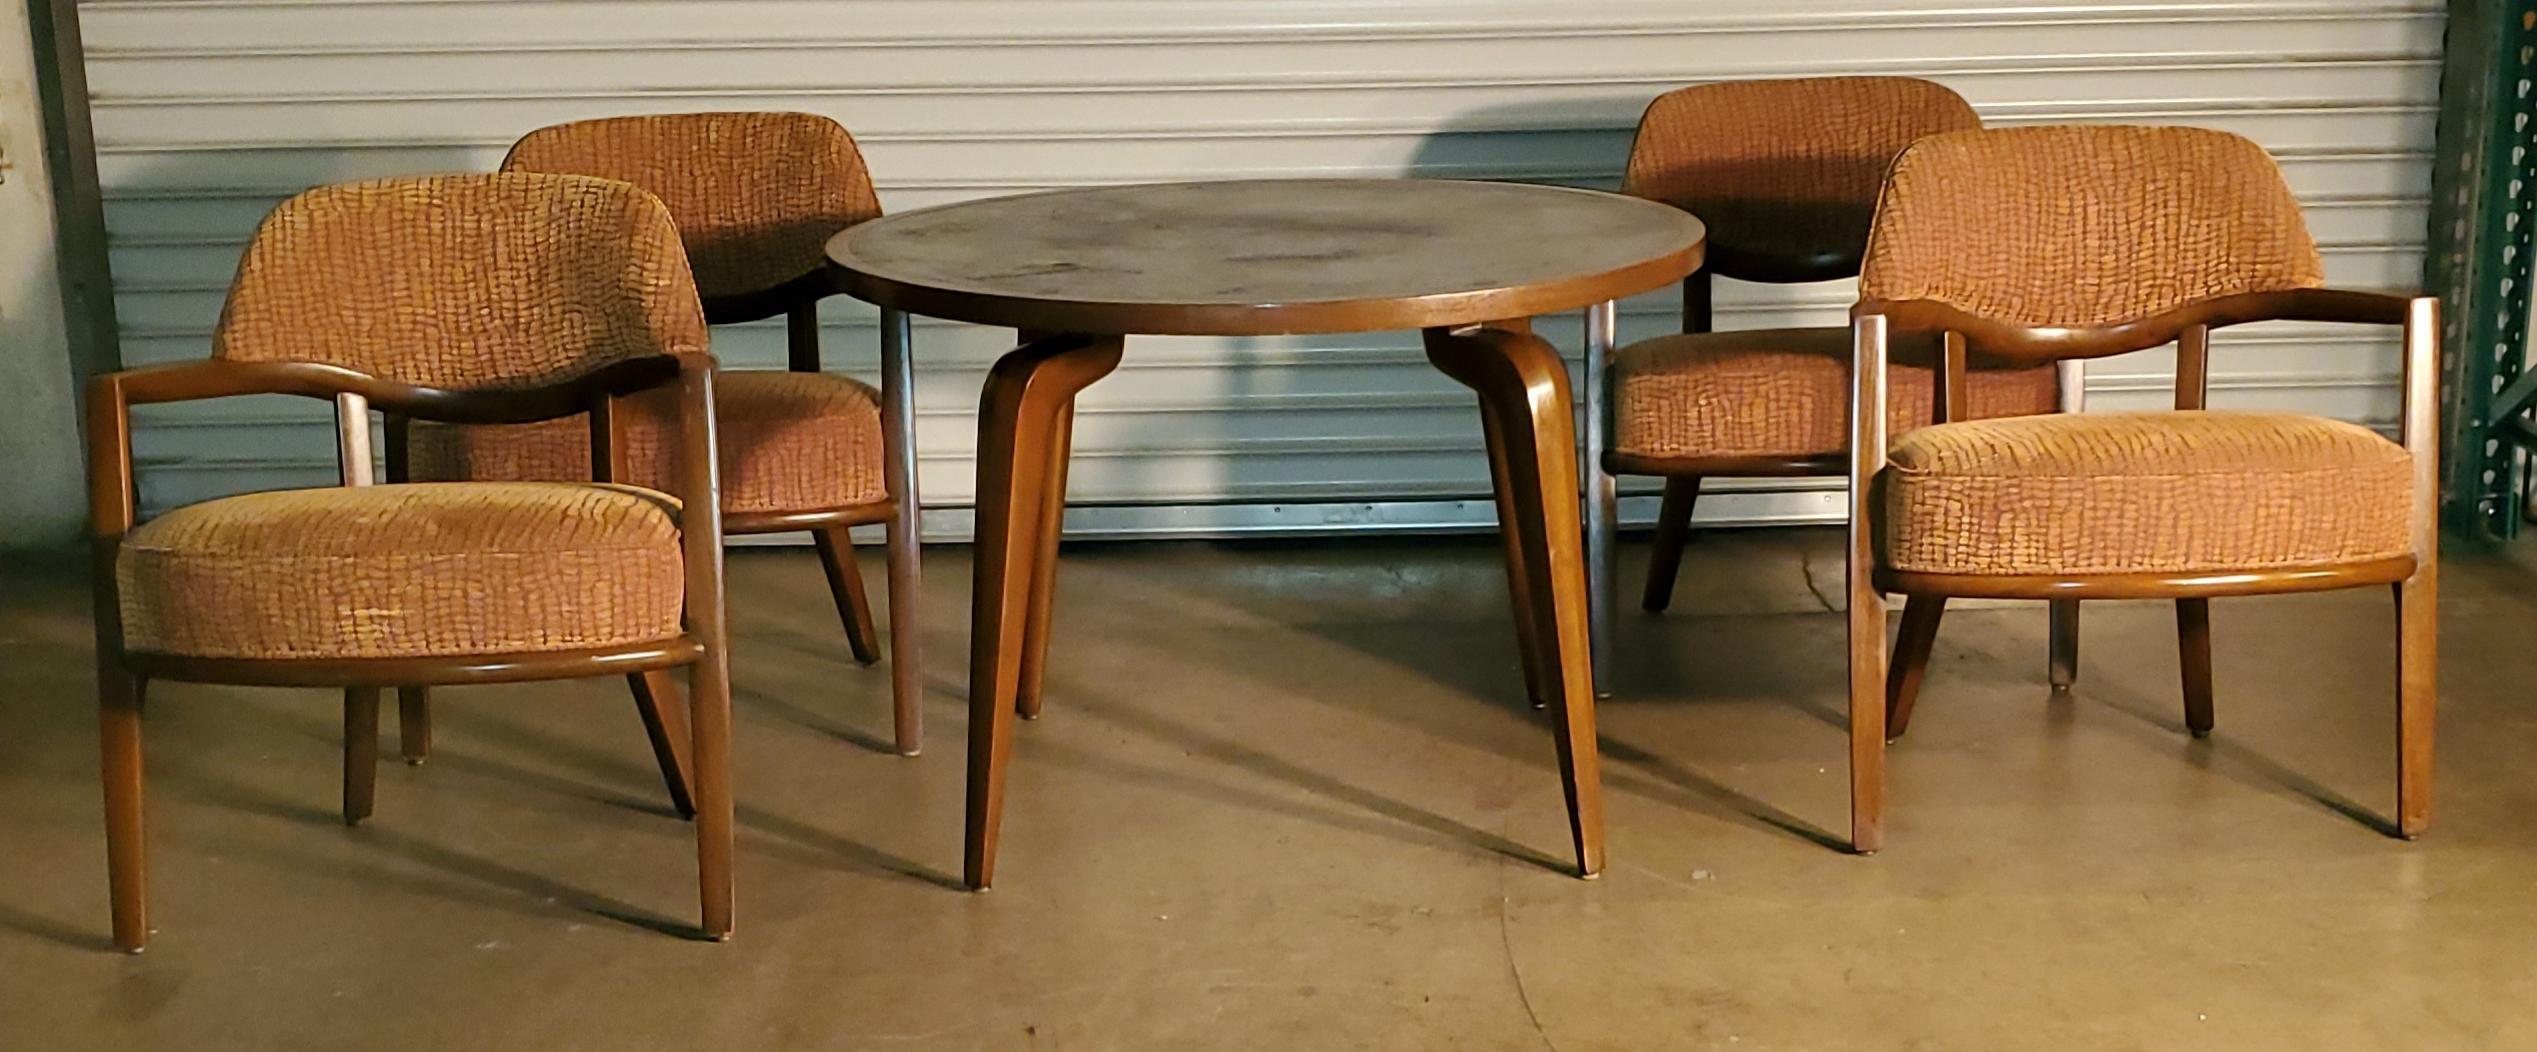 American RARE 1950s Maurice Bailey Monteverdi Young Card Table & 4 Maurice Bailey Chairs For Sale